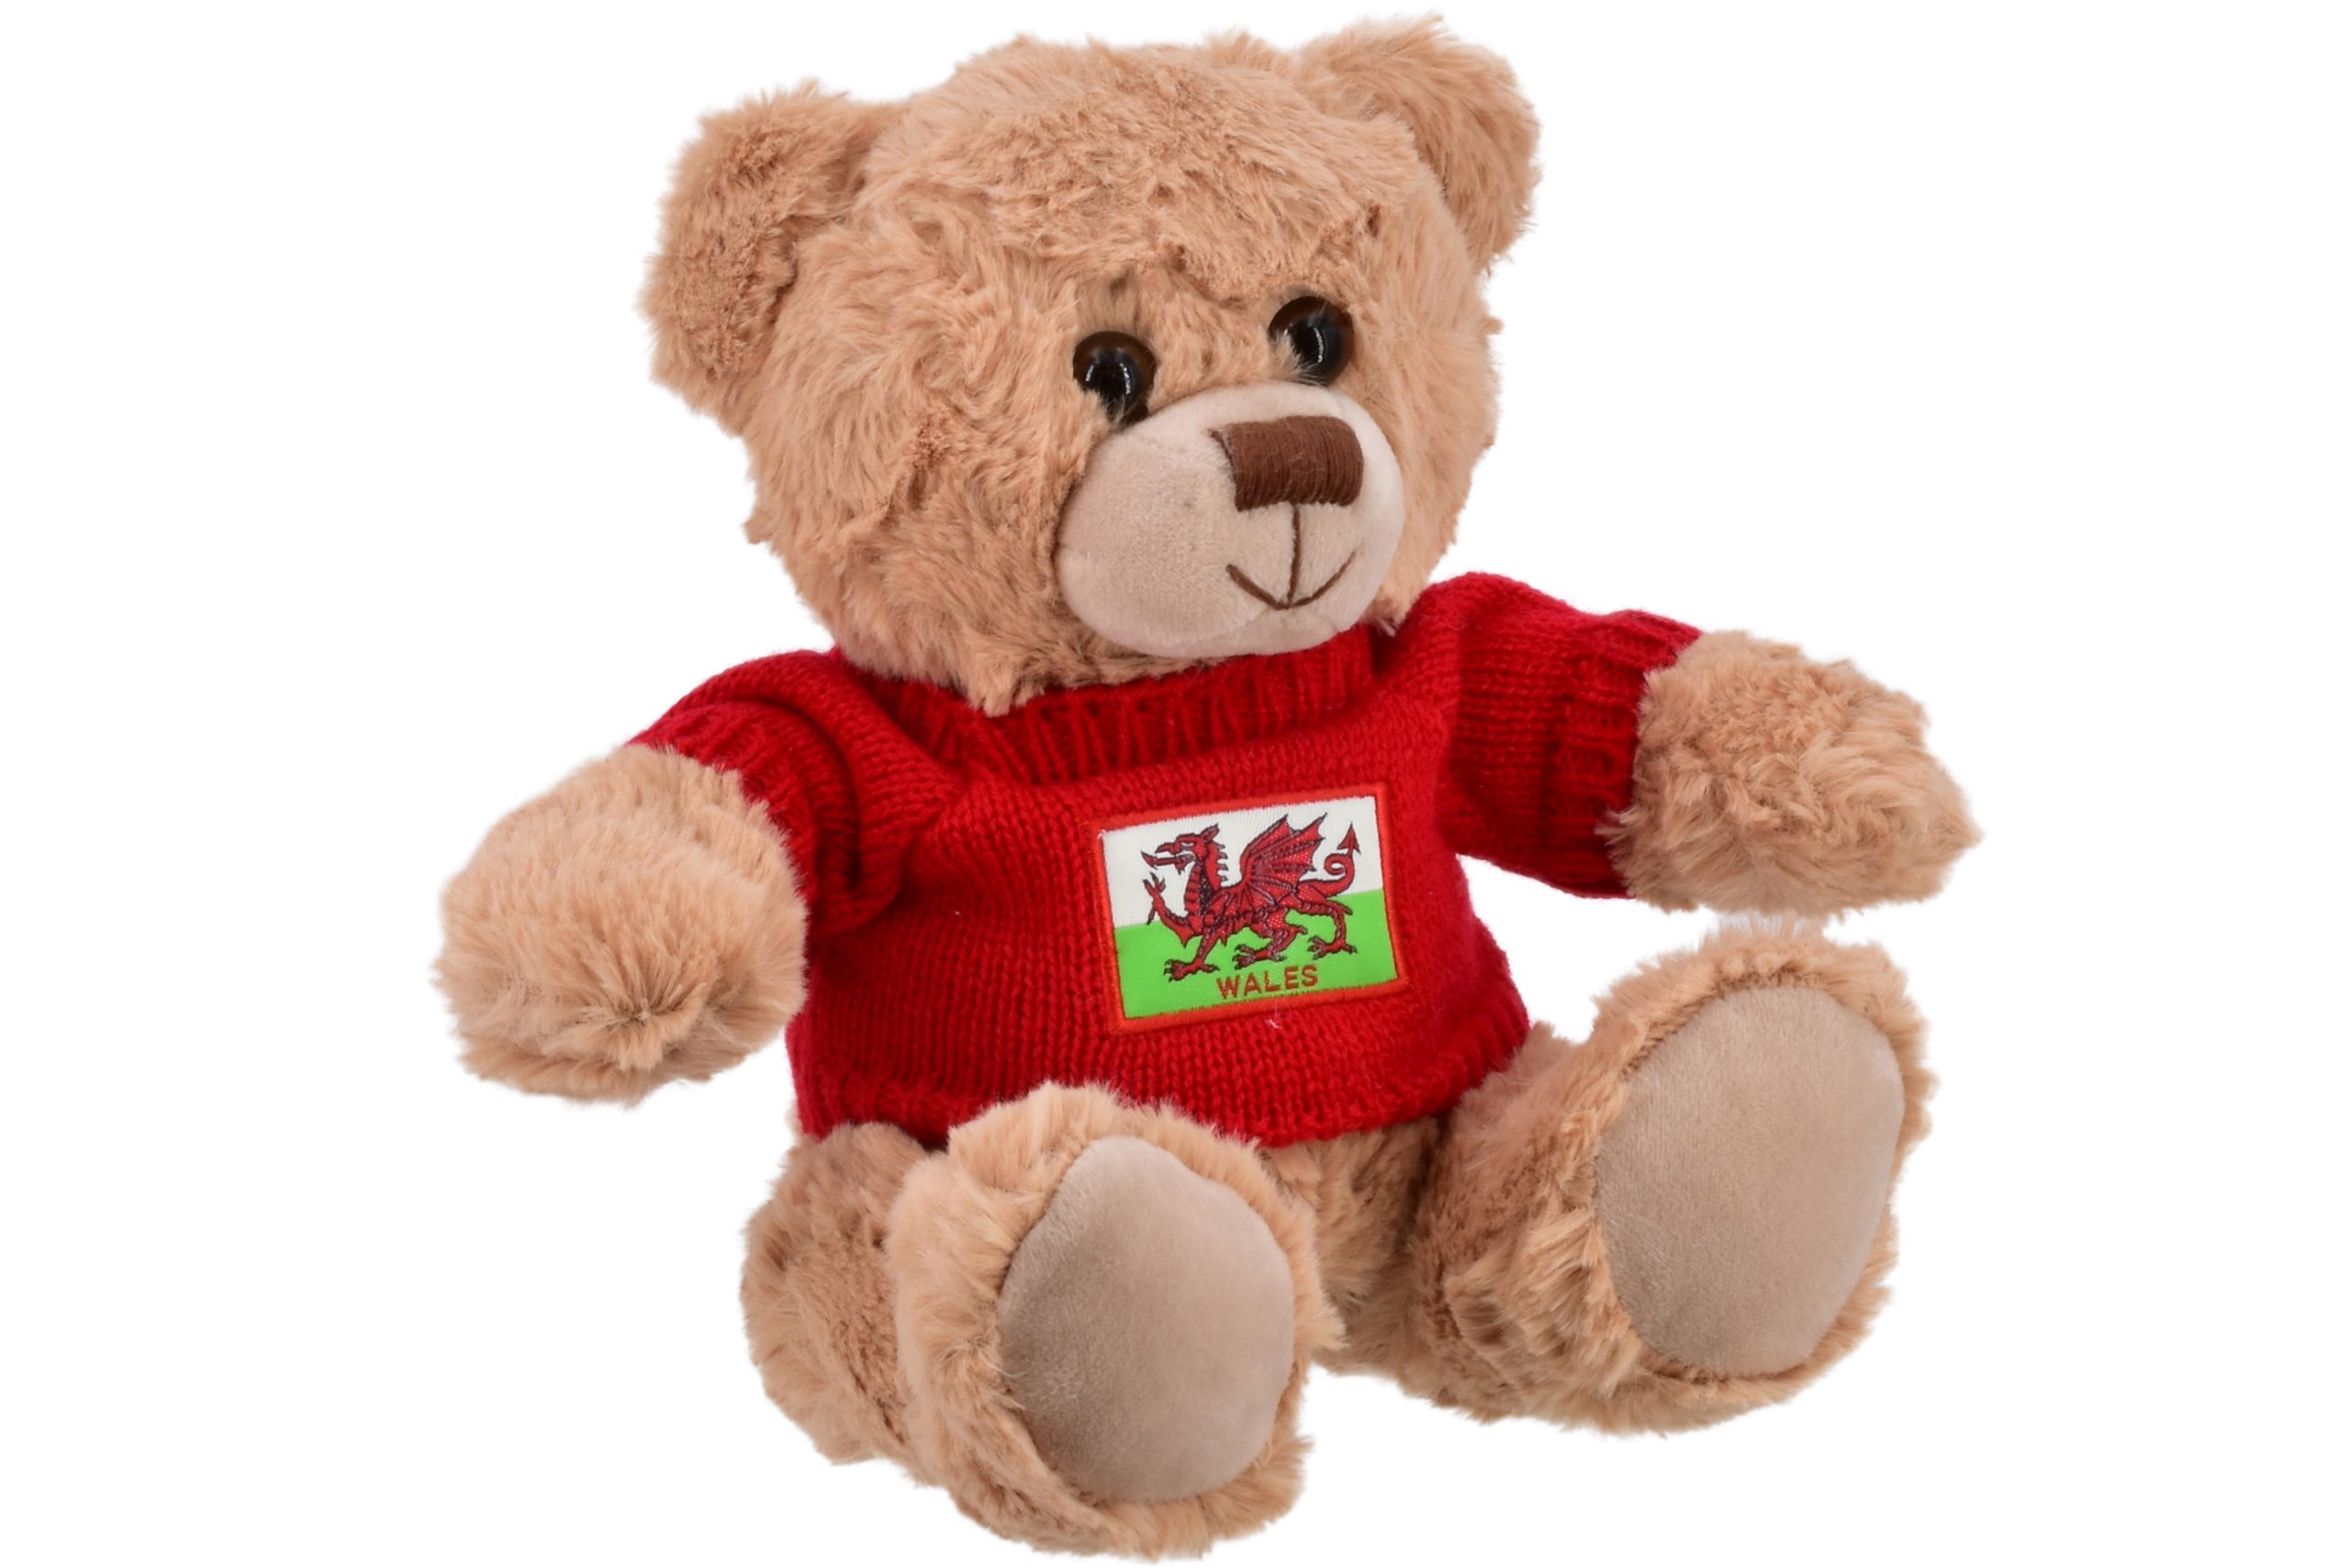 WALES PLUSH BEAR IN JUMPER 20CM - The Gift Wholesaler